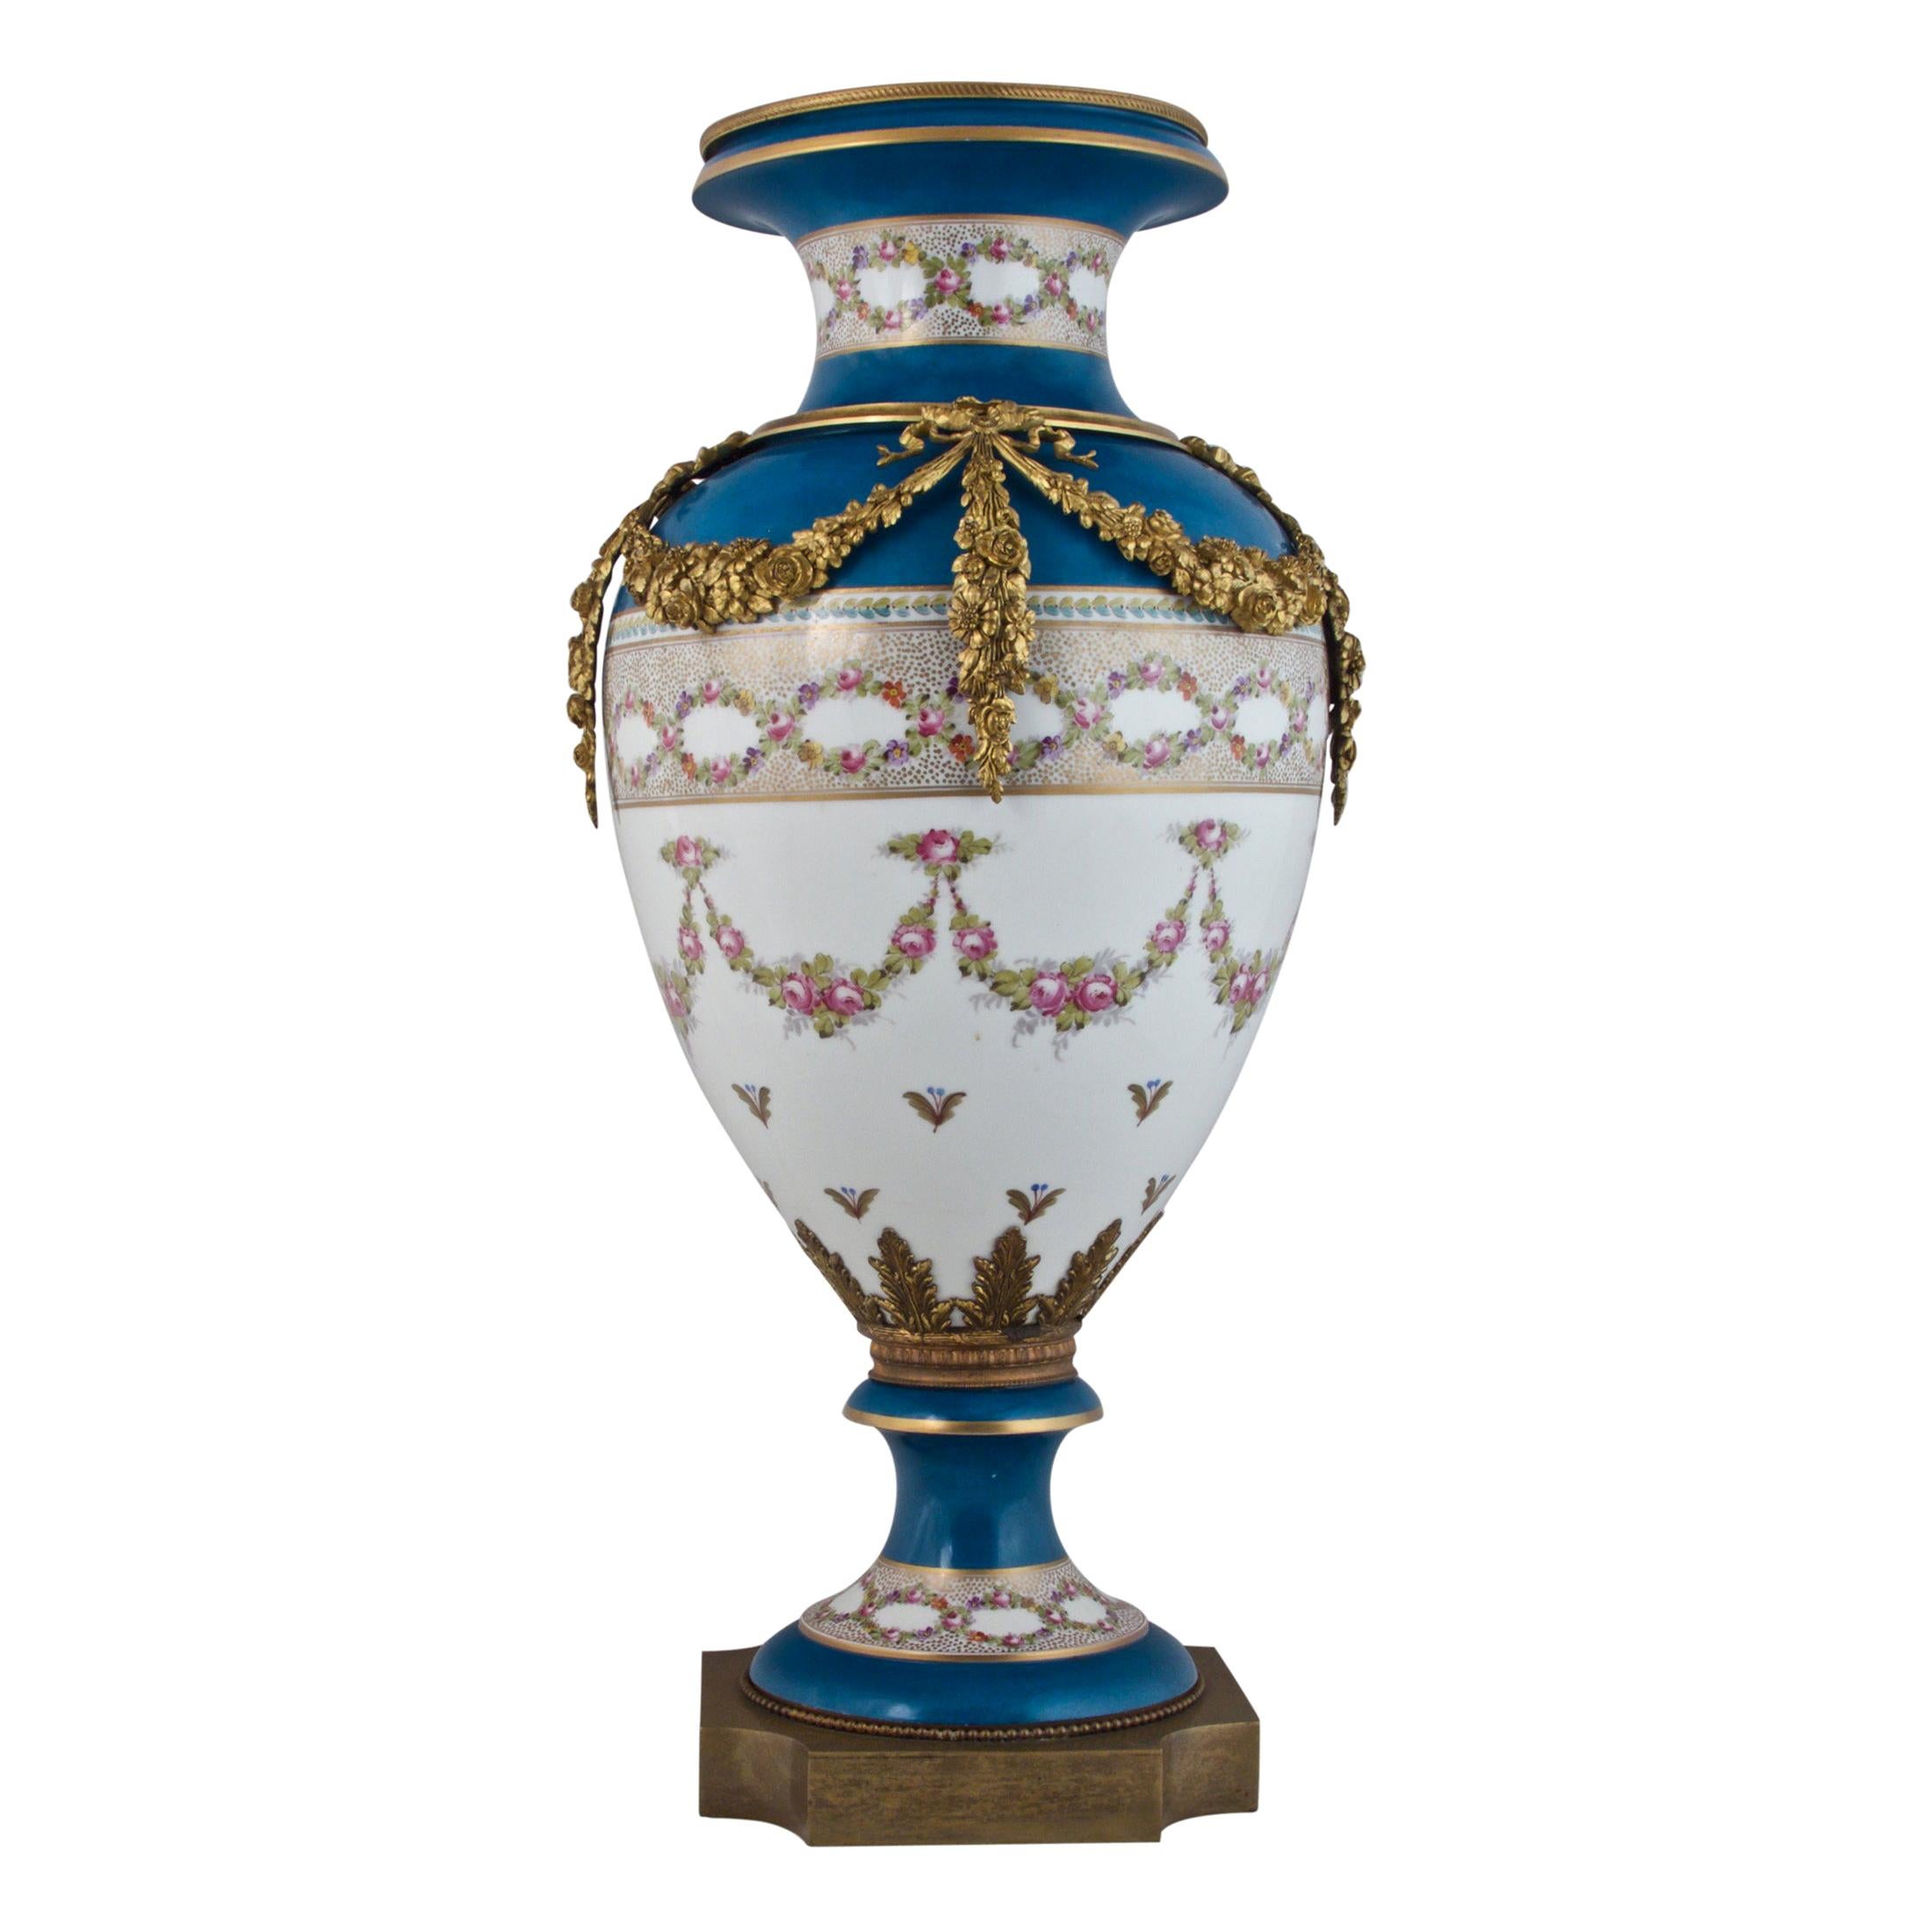 Late 19th Century French Sèvres-Style Ormolu-Mounted Porcelain Vase For Sale